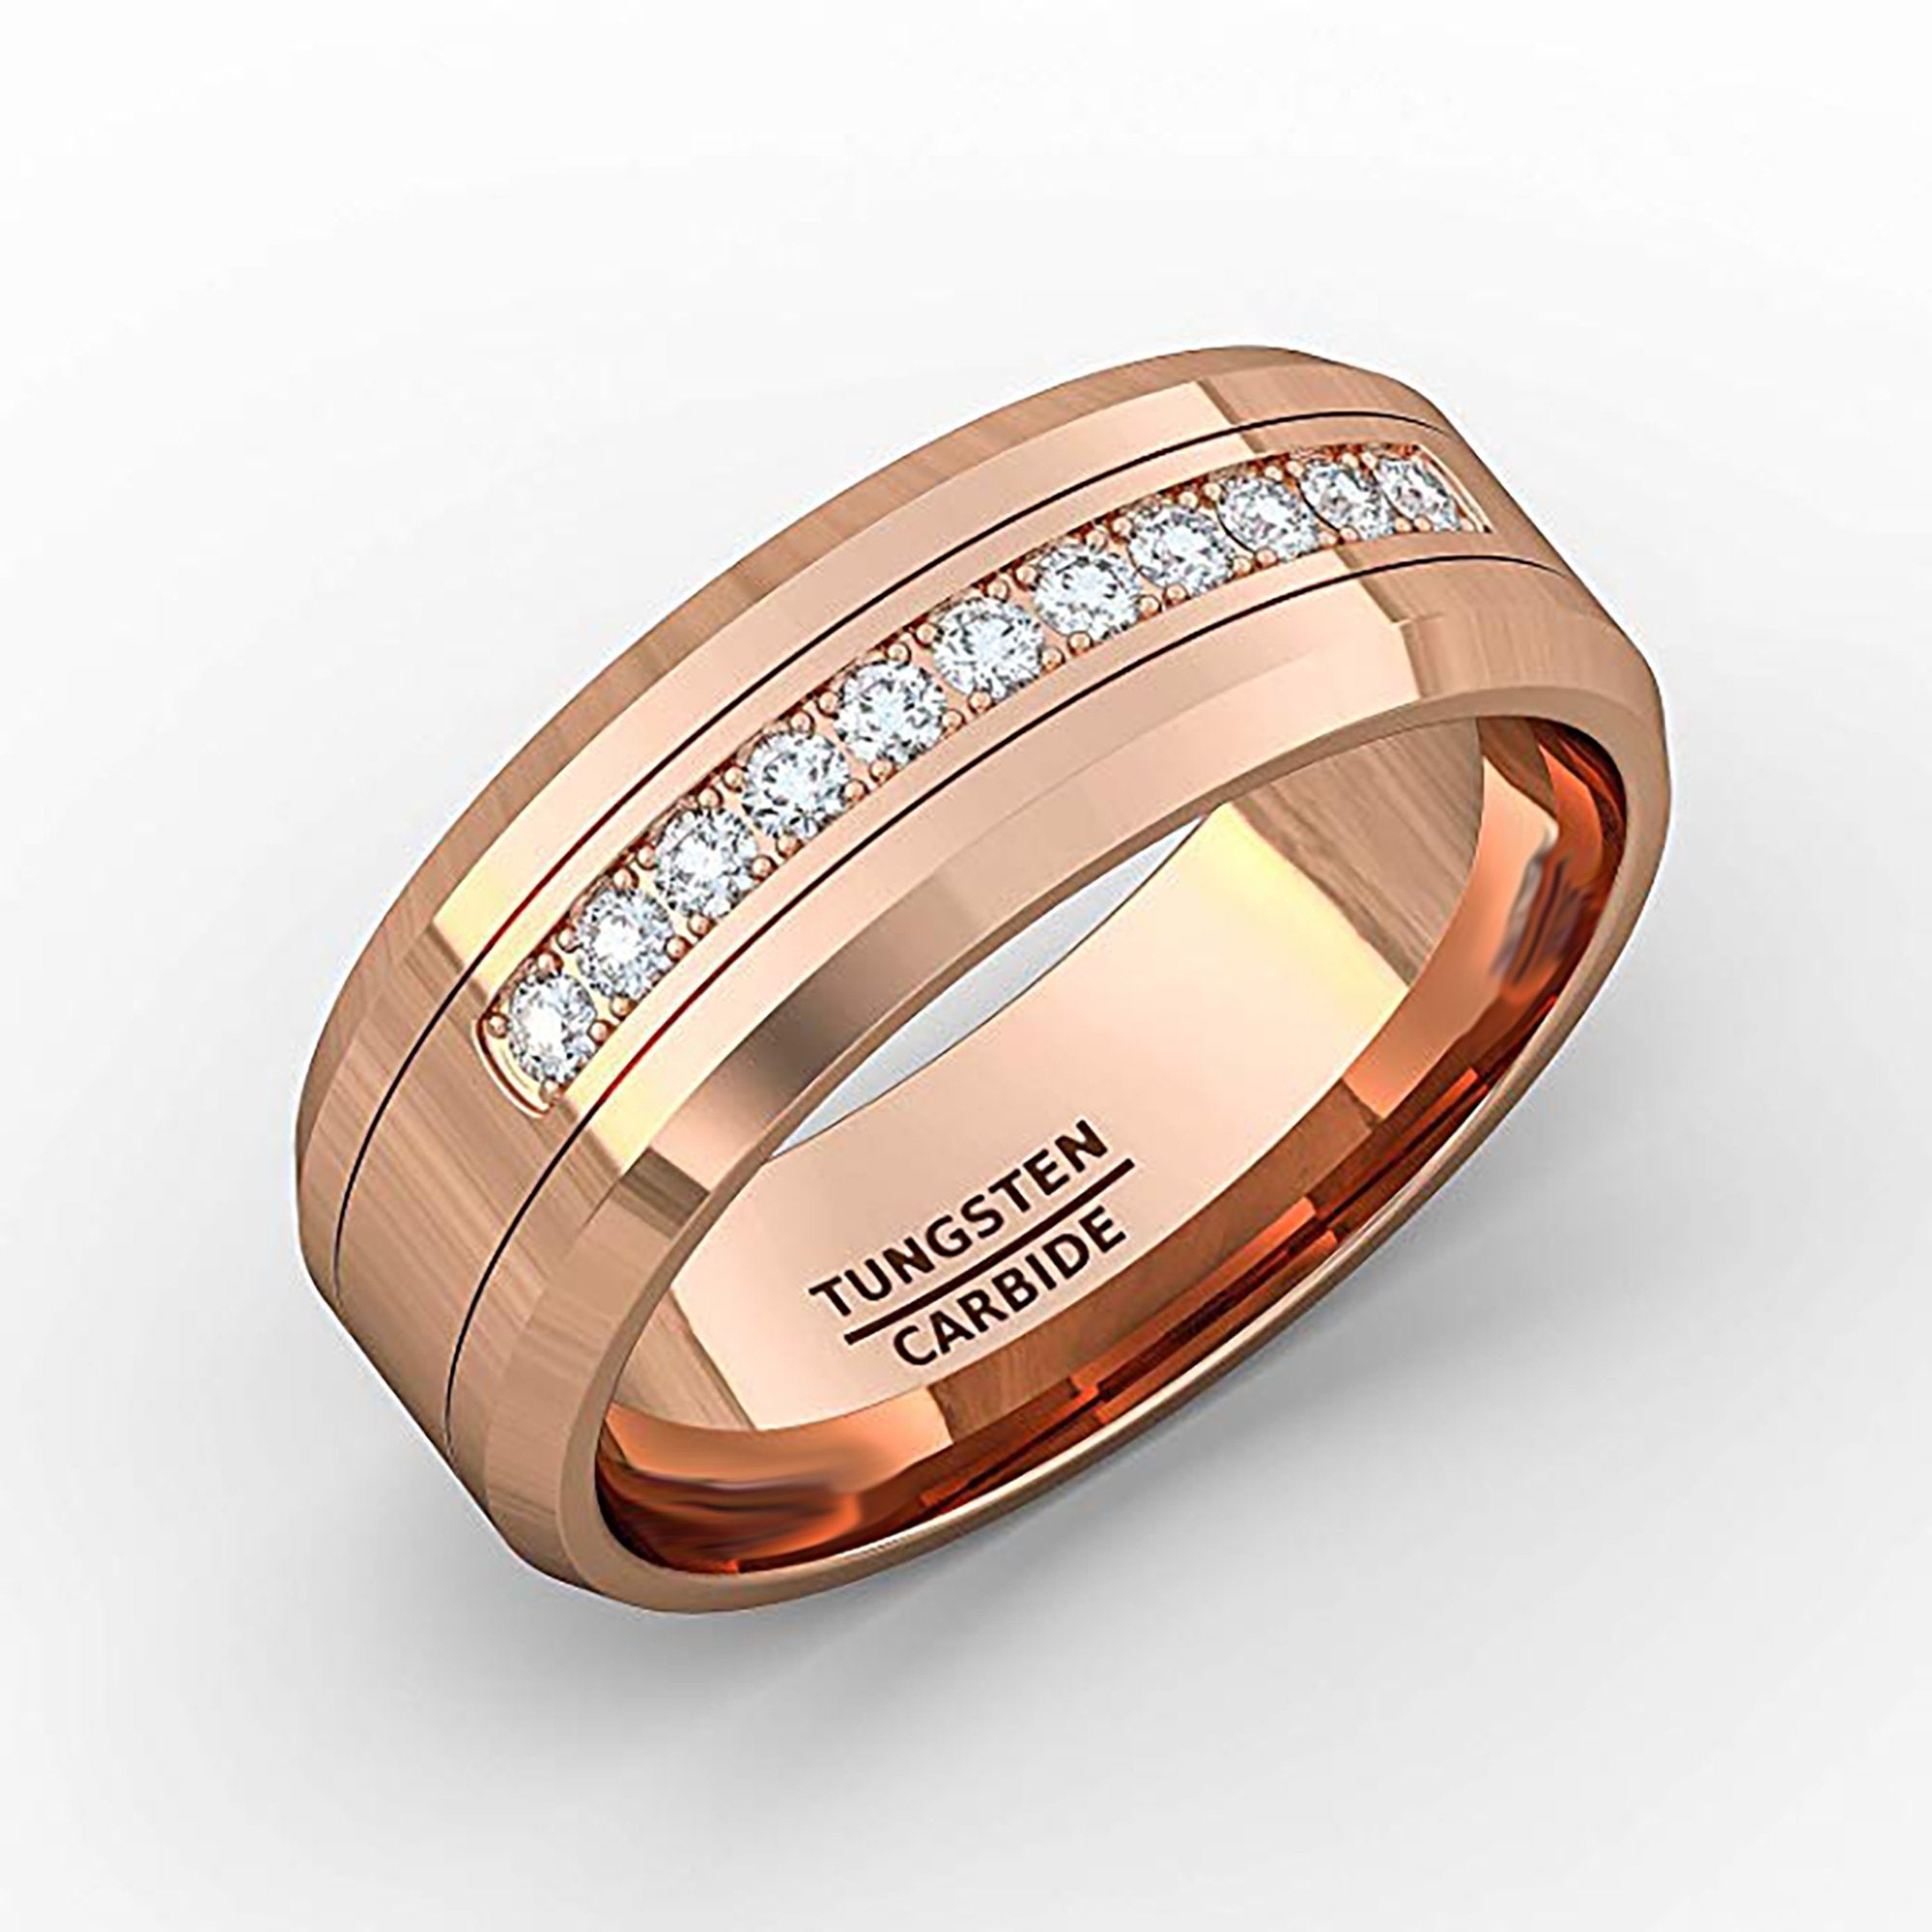 Rose Gold Tungsten, Tungsten Carbide, Mens Wedding Band,Engagement Ring, Promise Ring, Rings for Men, Anniversary Ring,Black Rose Gold Ring